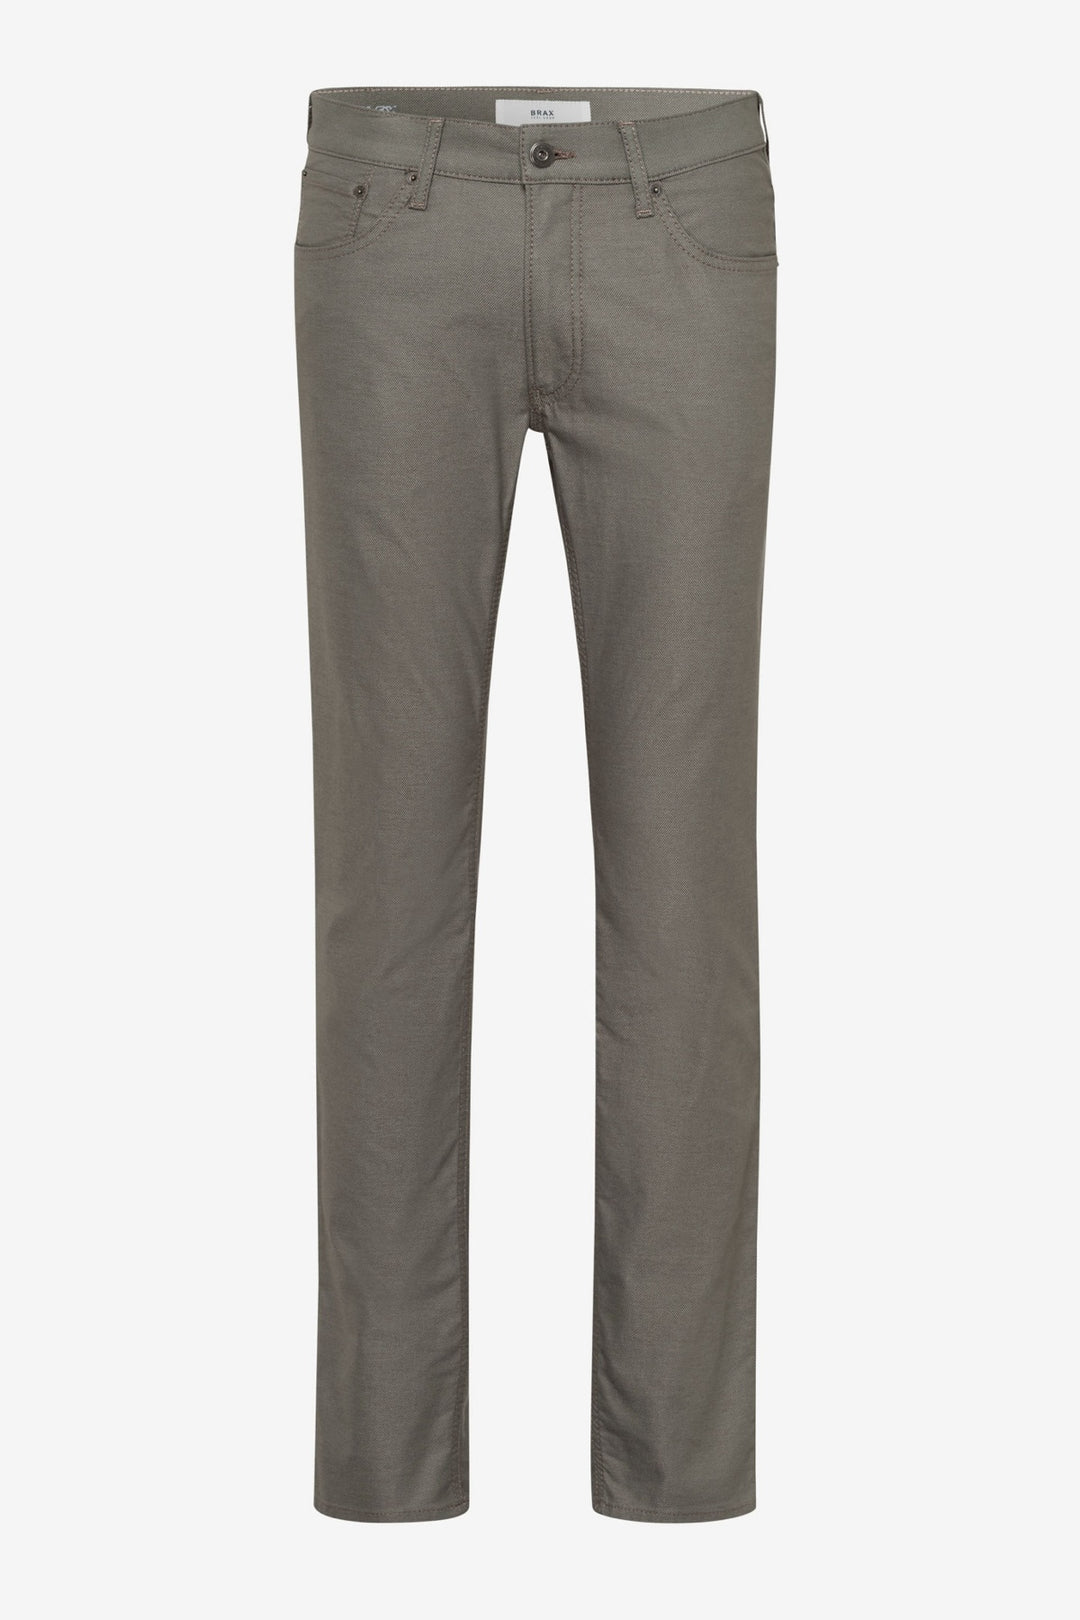 Chuck fit textured pants